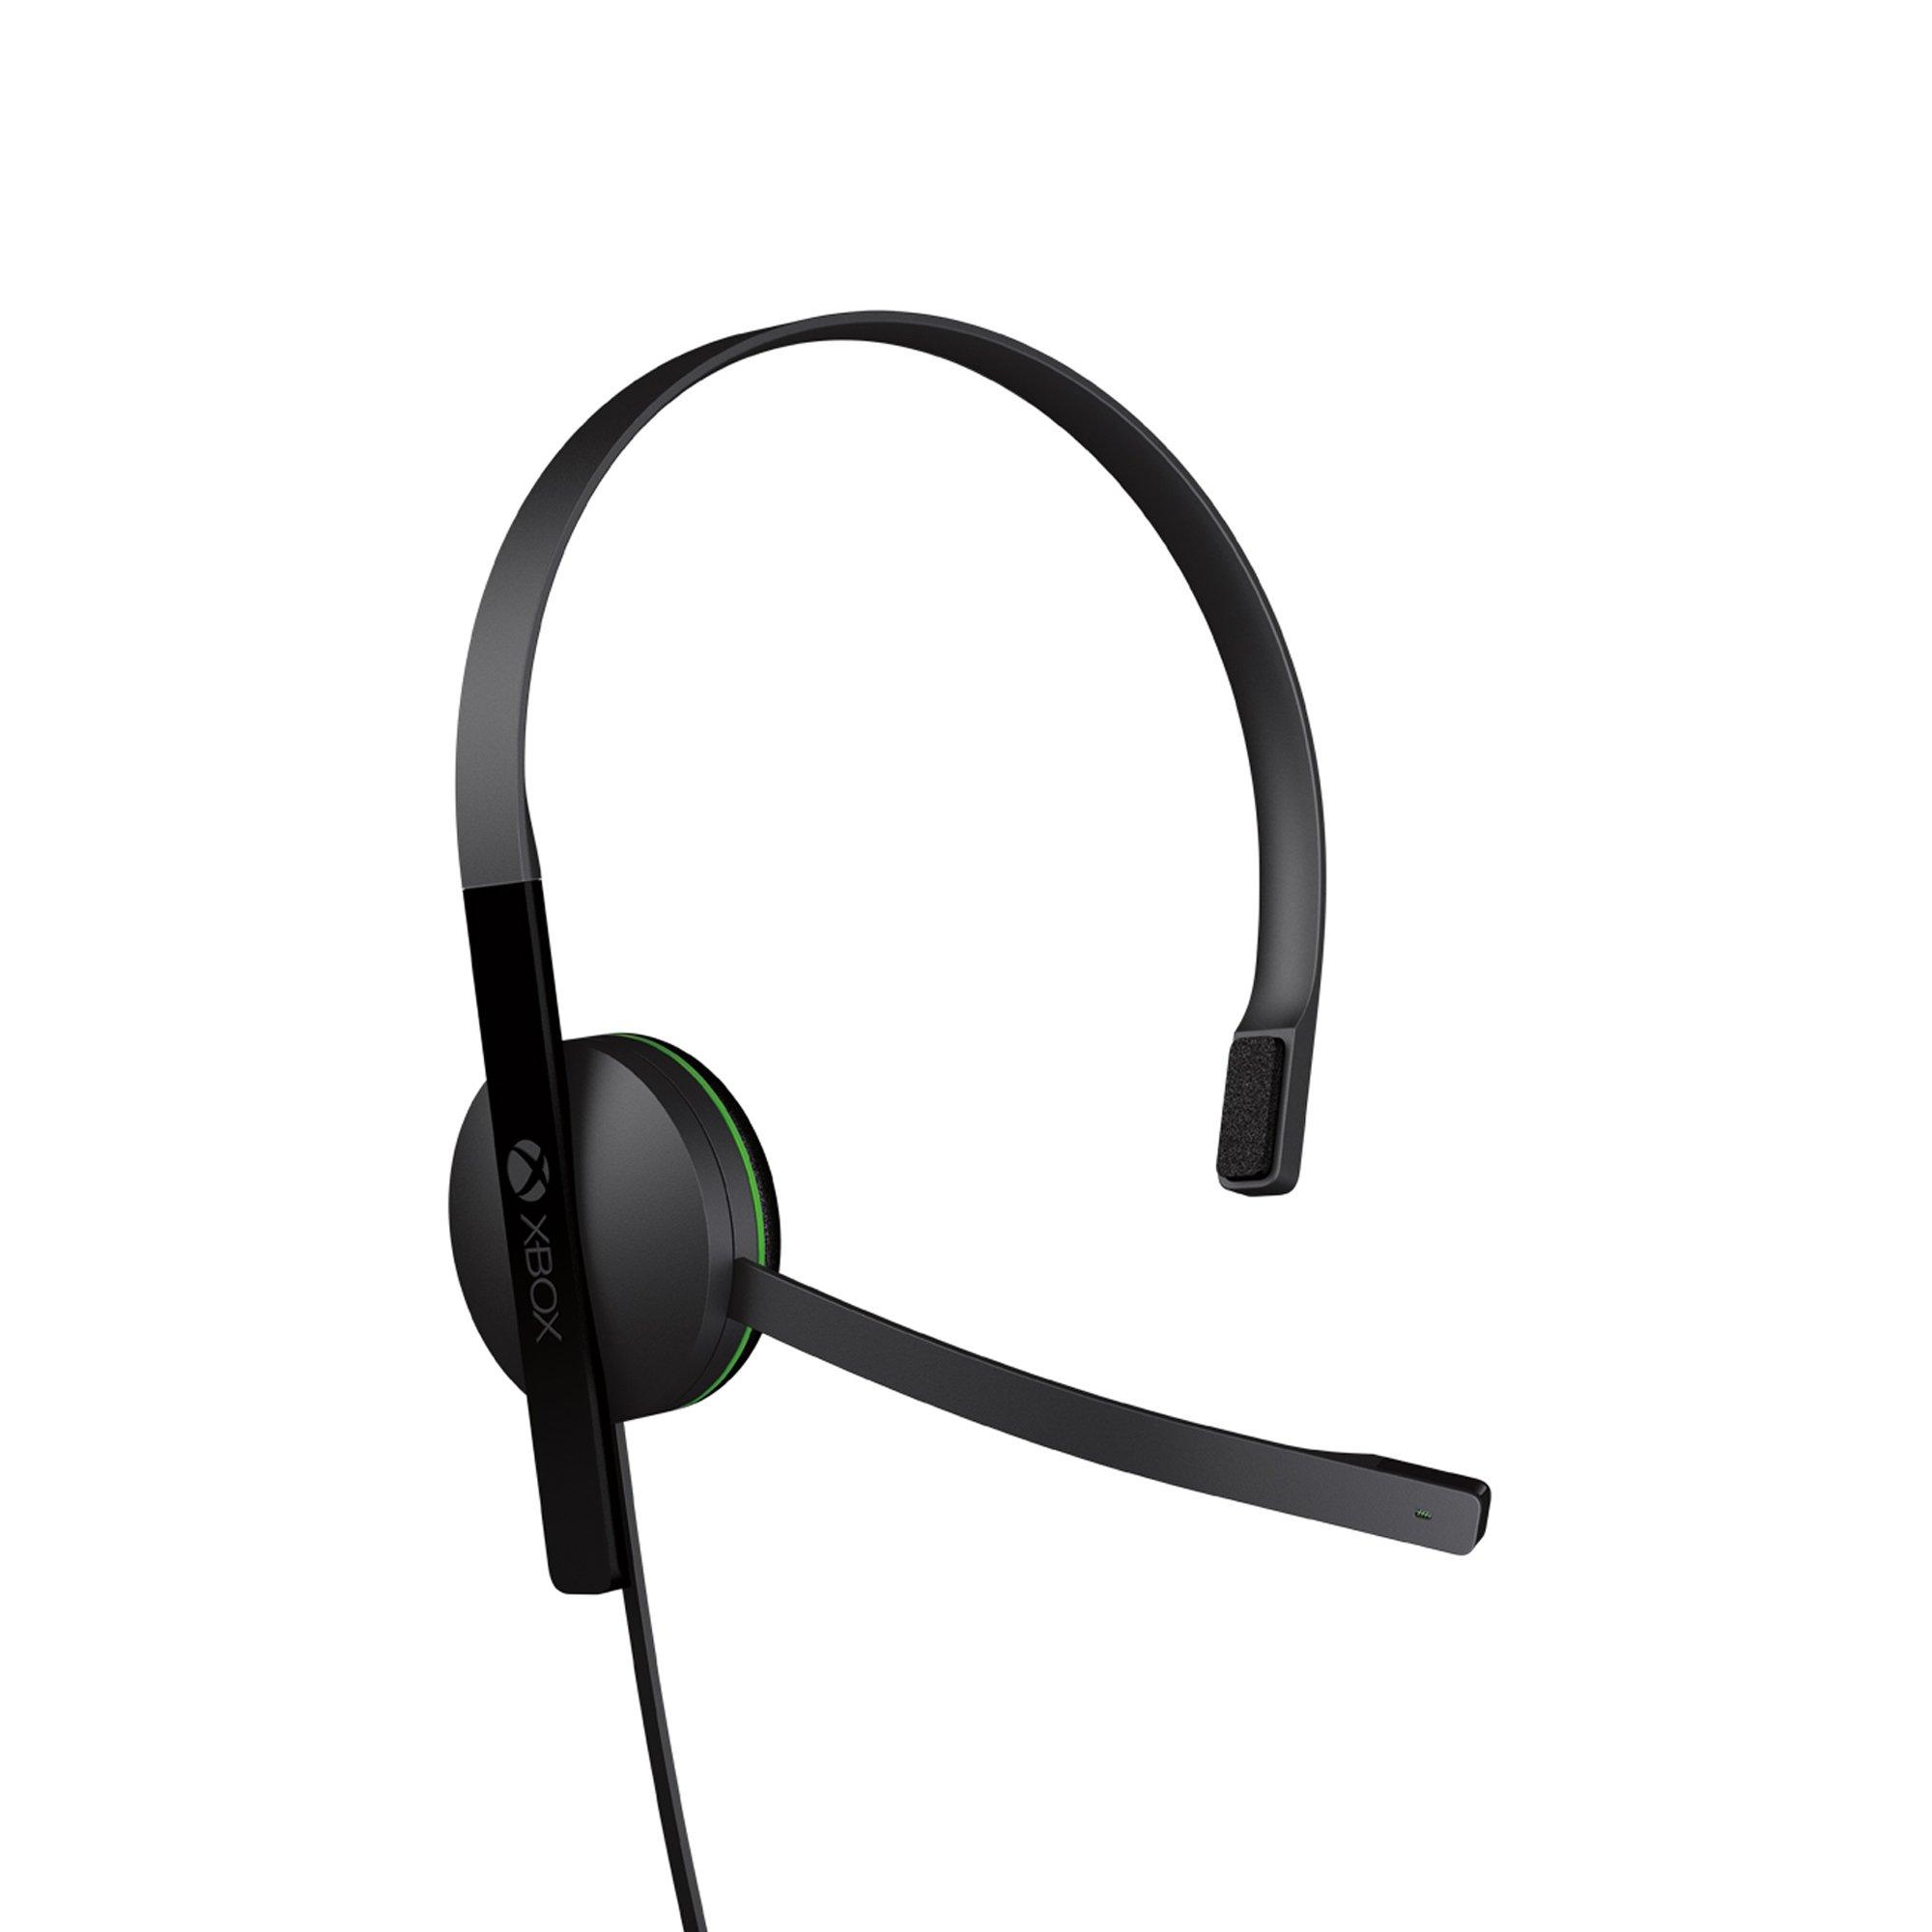 old style xbox one headset